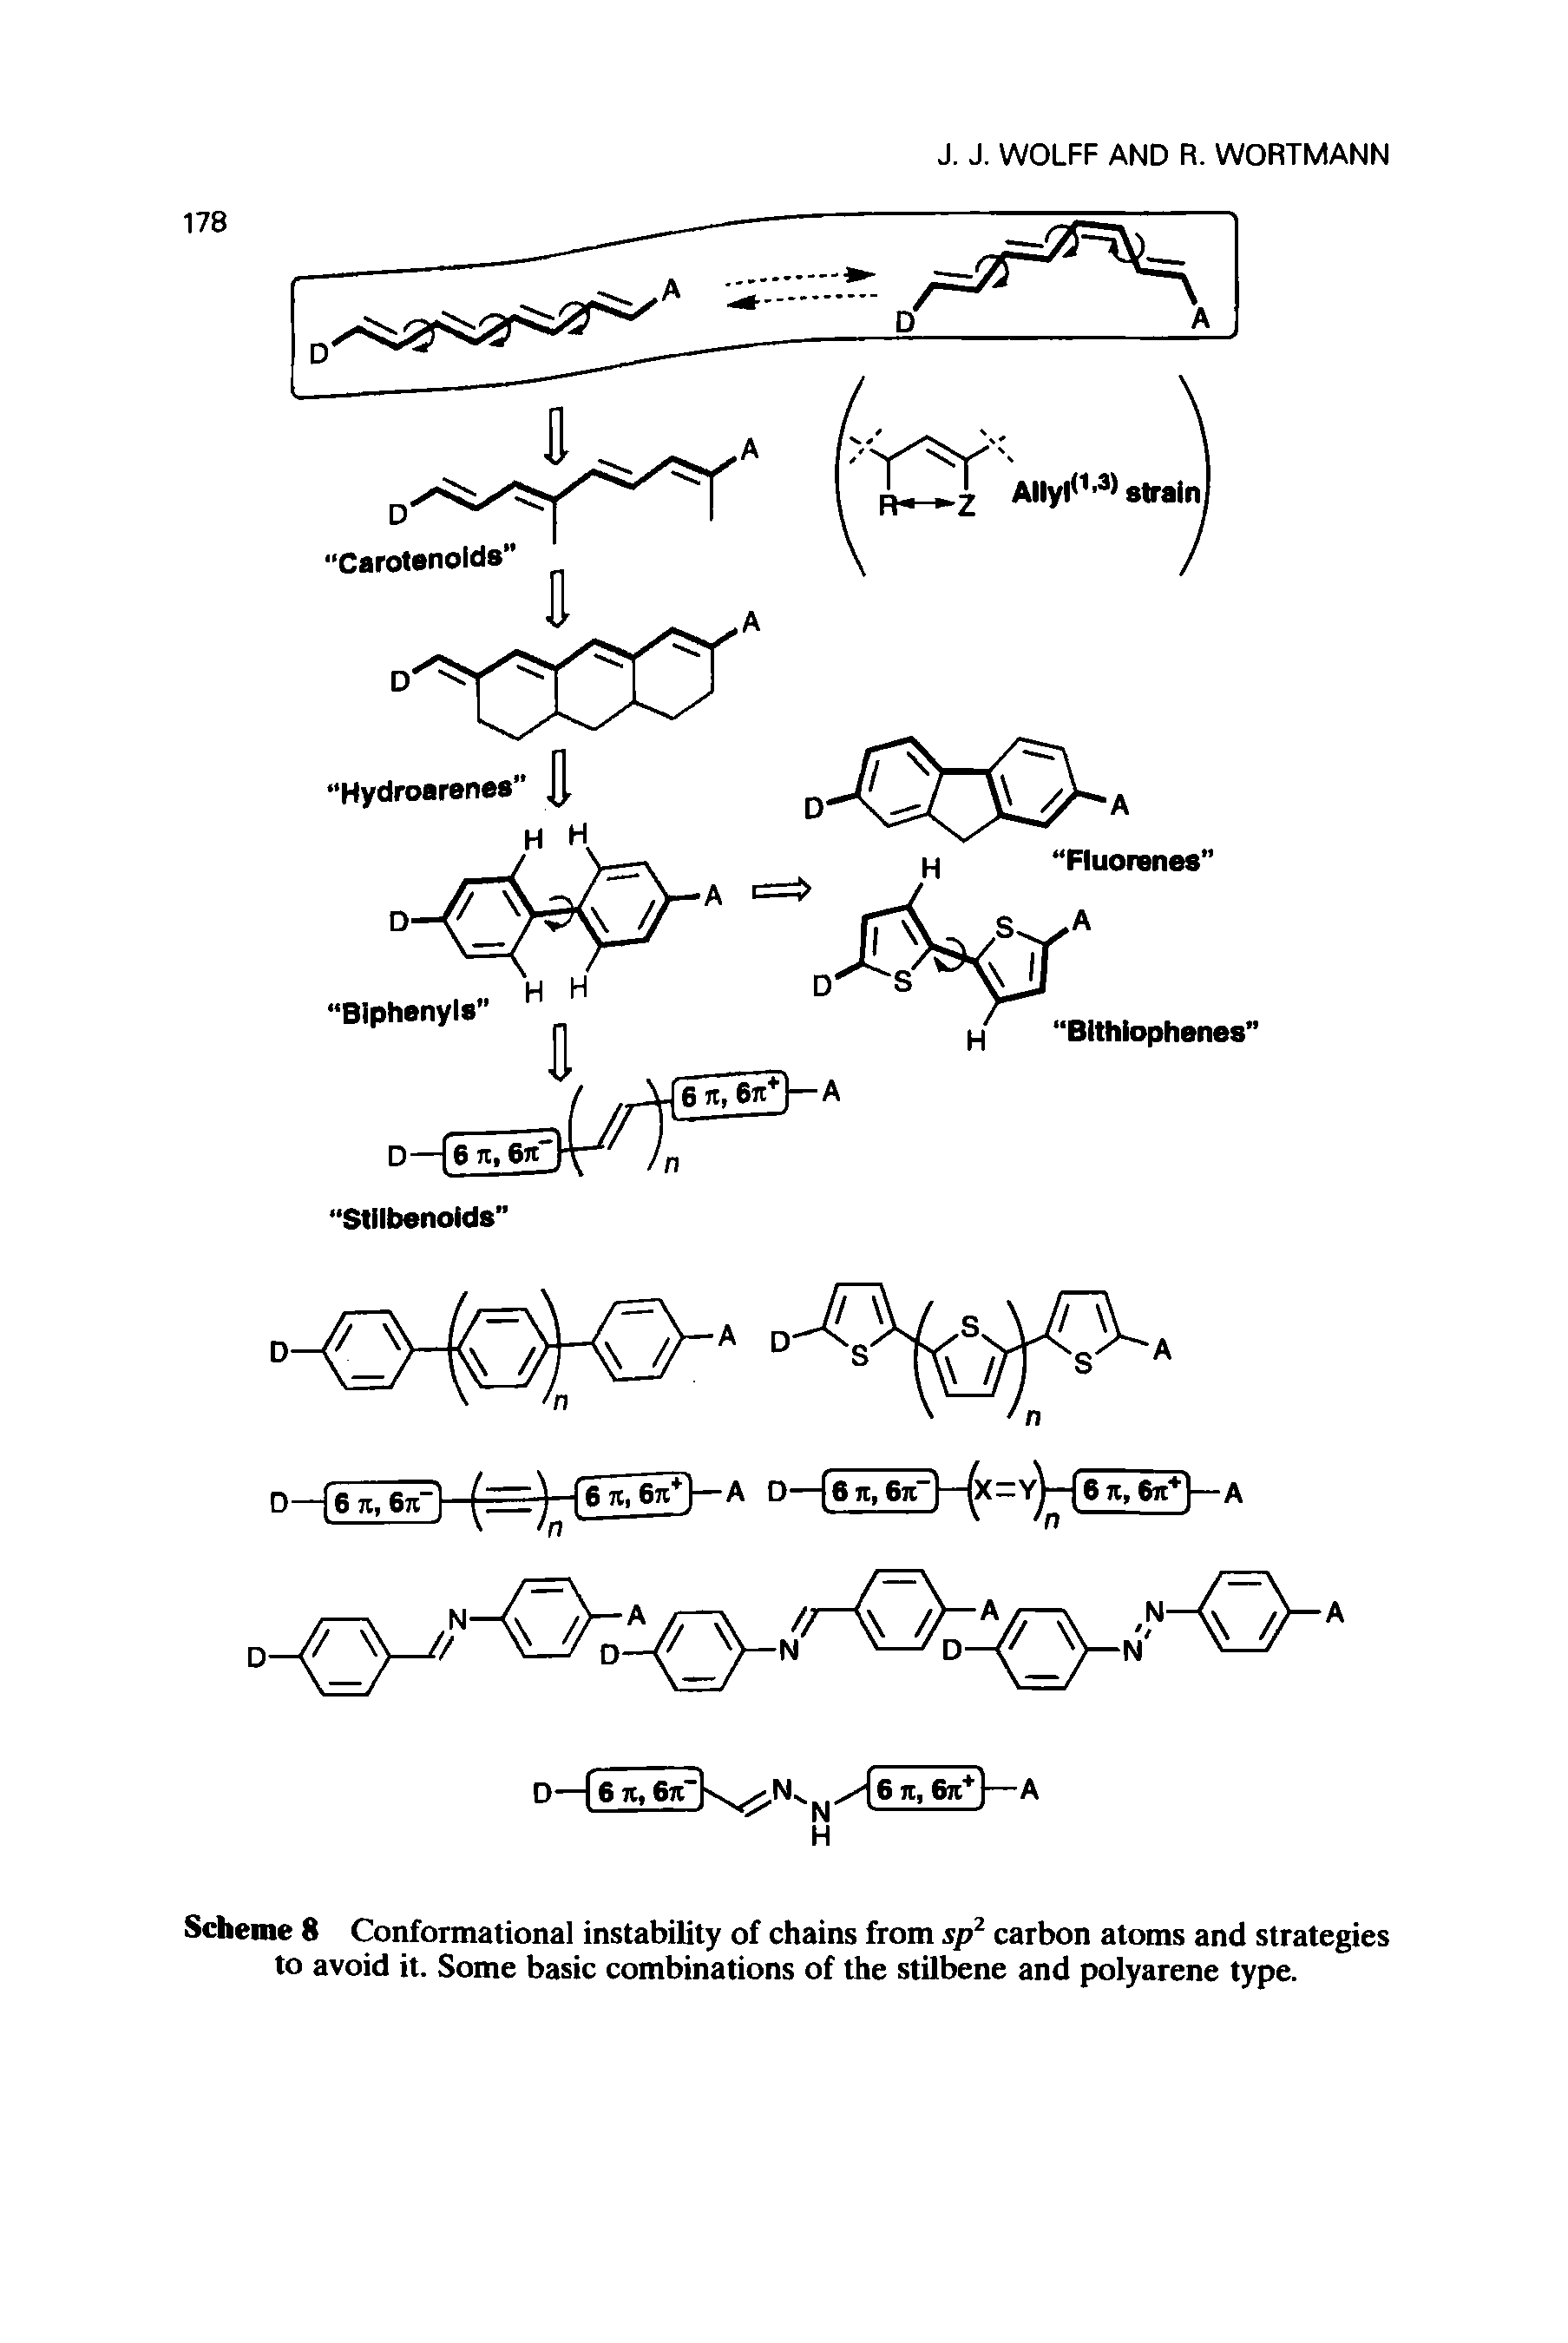 Scheme 8 Conformational instability of chains from sp carbon atoms and strategies to avoid it. Some basic combinations of the stilbene and polyarene type.